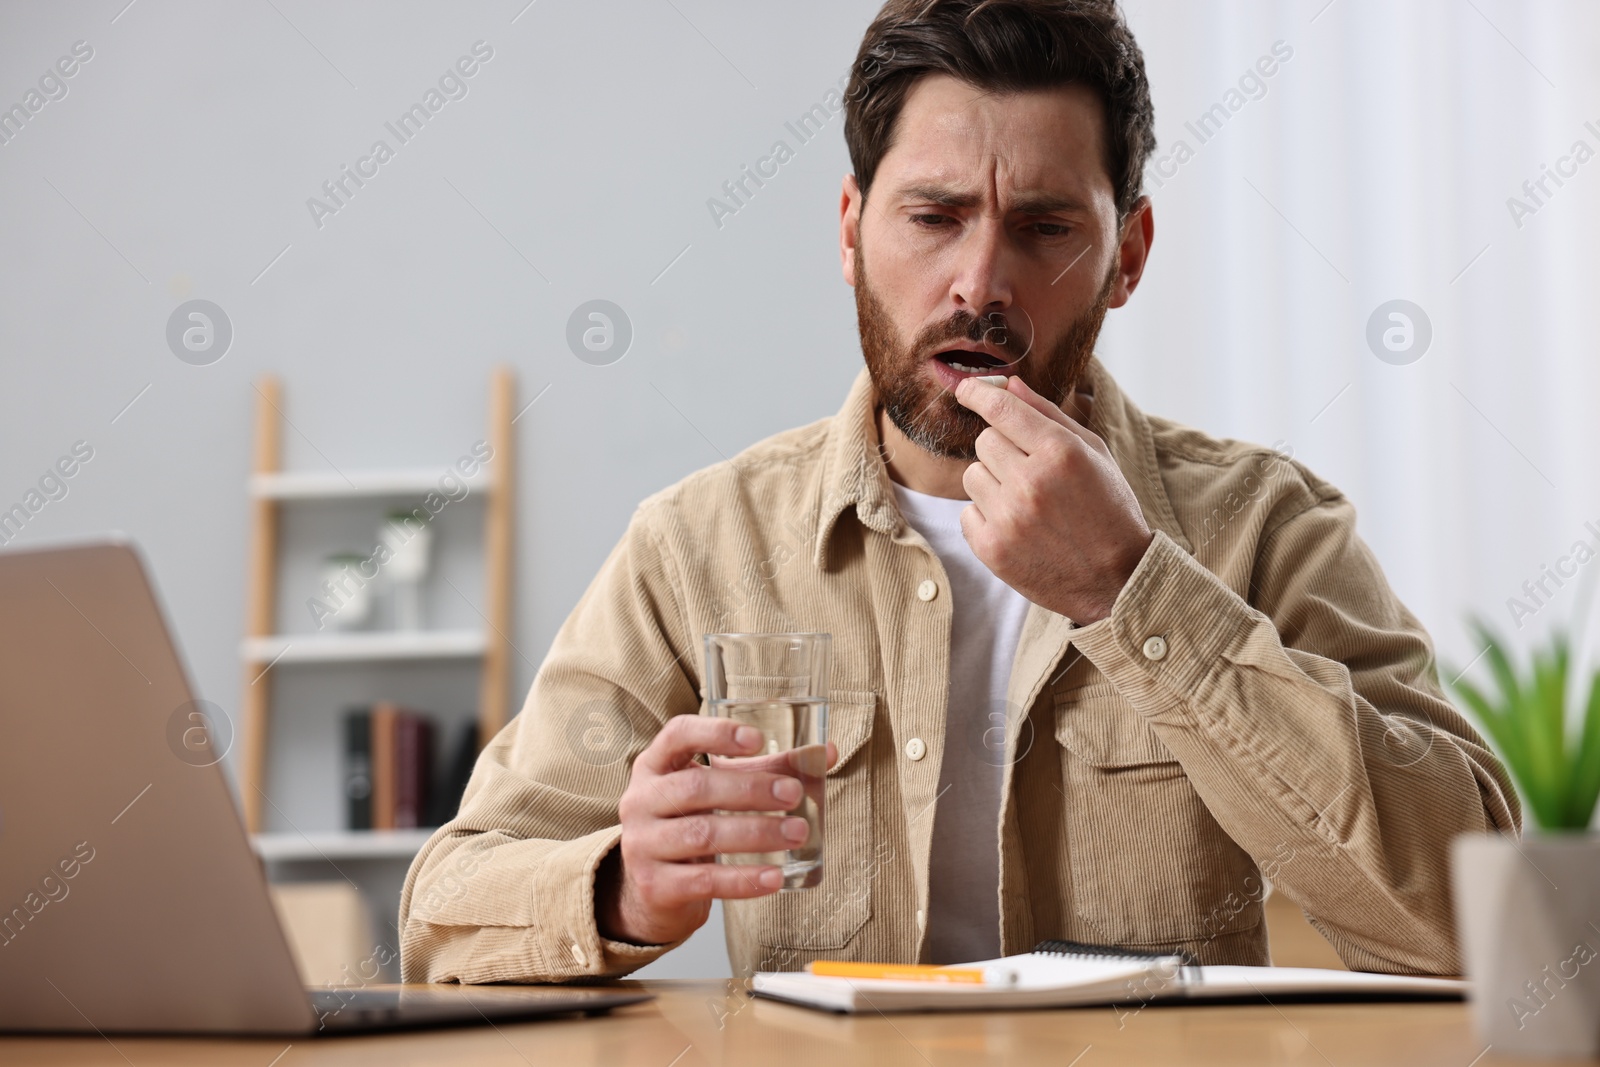 Photo of Worried man with glass of water taking pill from headache at workplace.